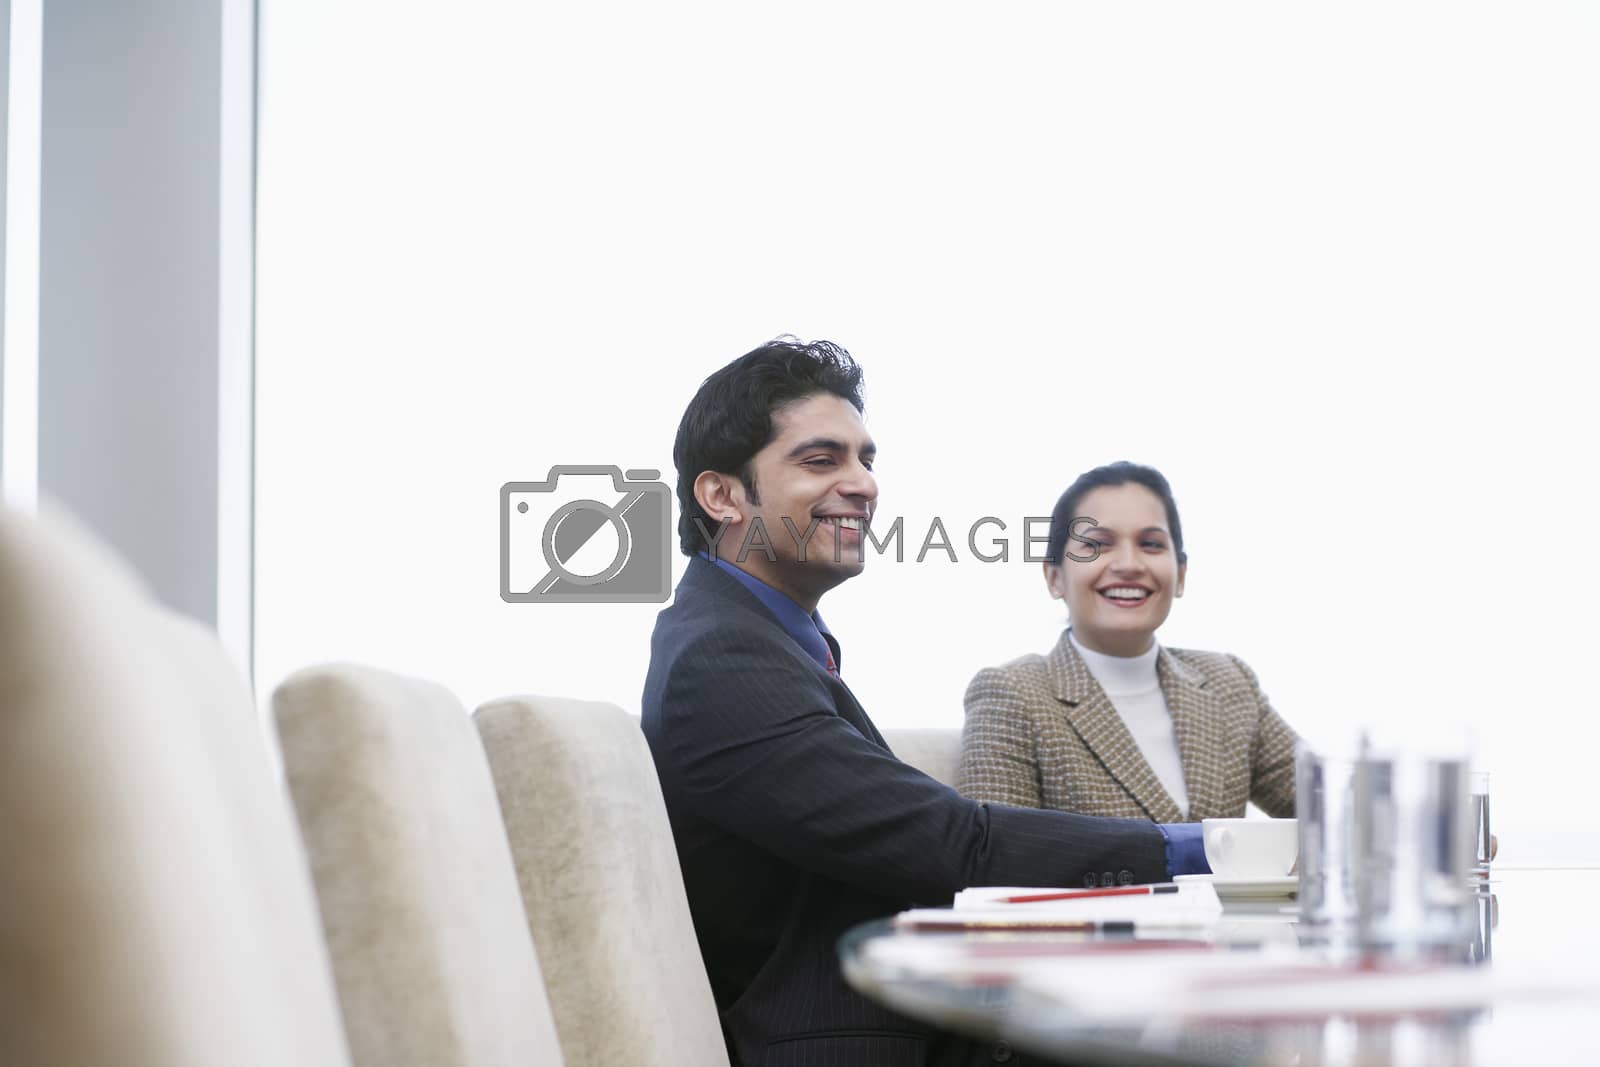 Royalty free image of Business associates smiling having business meeting by moodboard